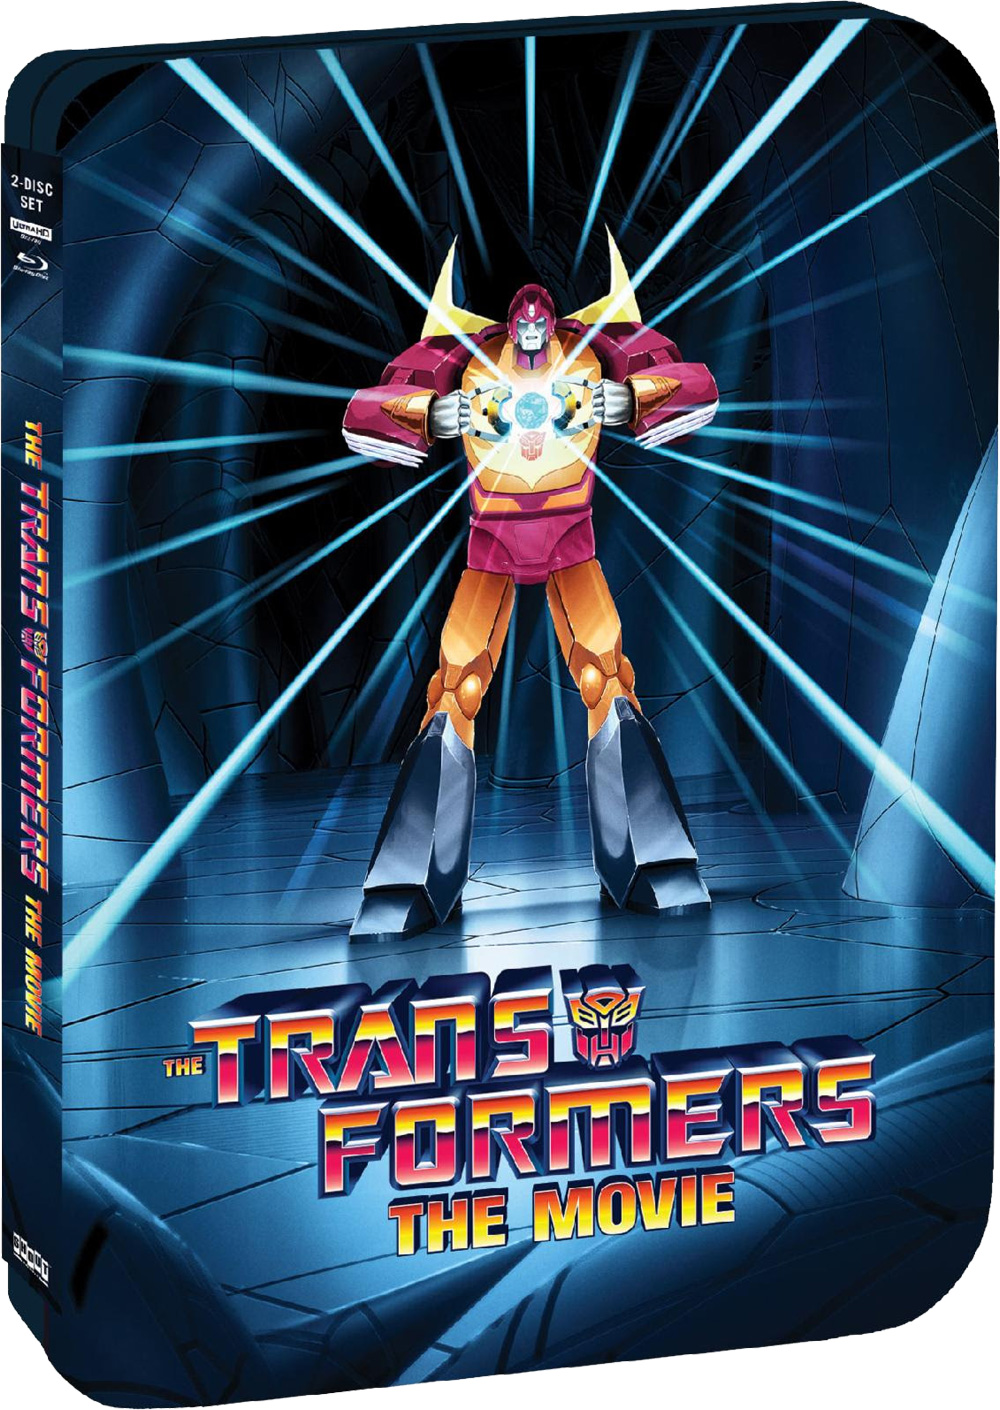 The Transformers - The Movie 35th Anniversary Limited Edition SteelBook